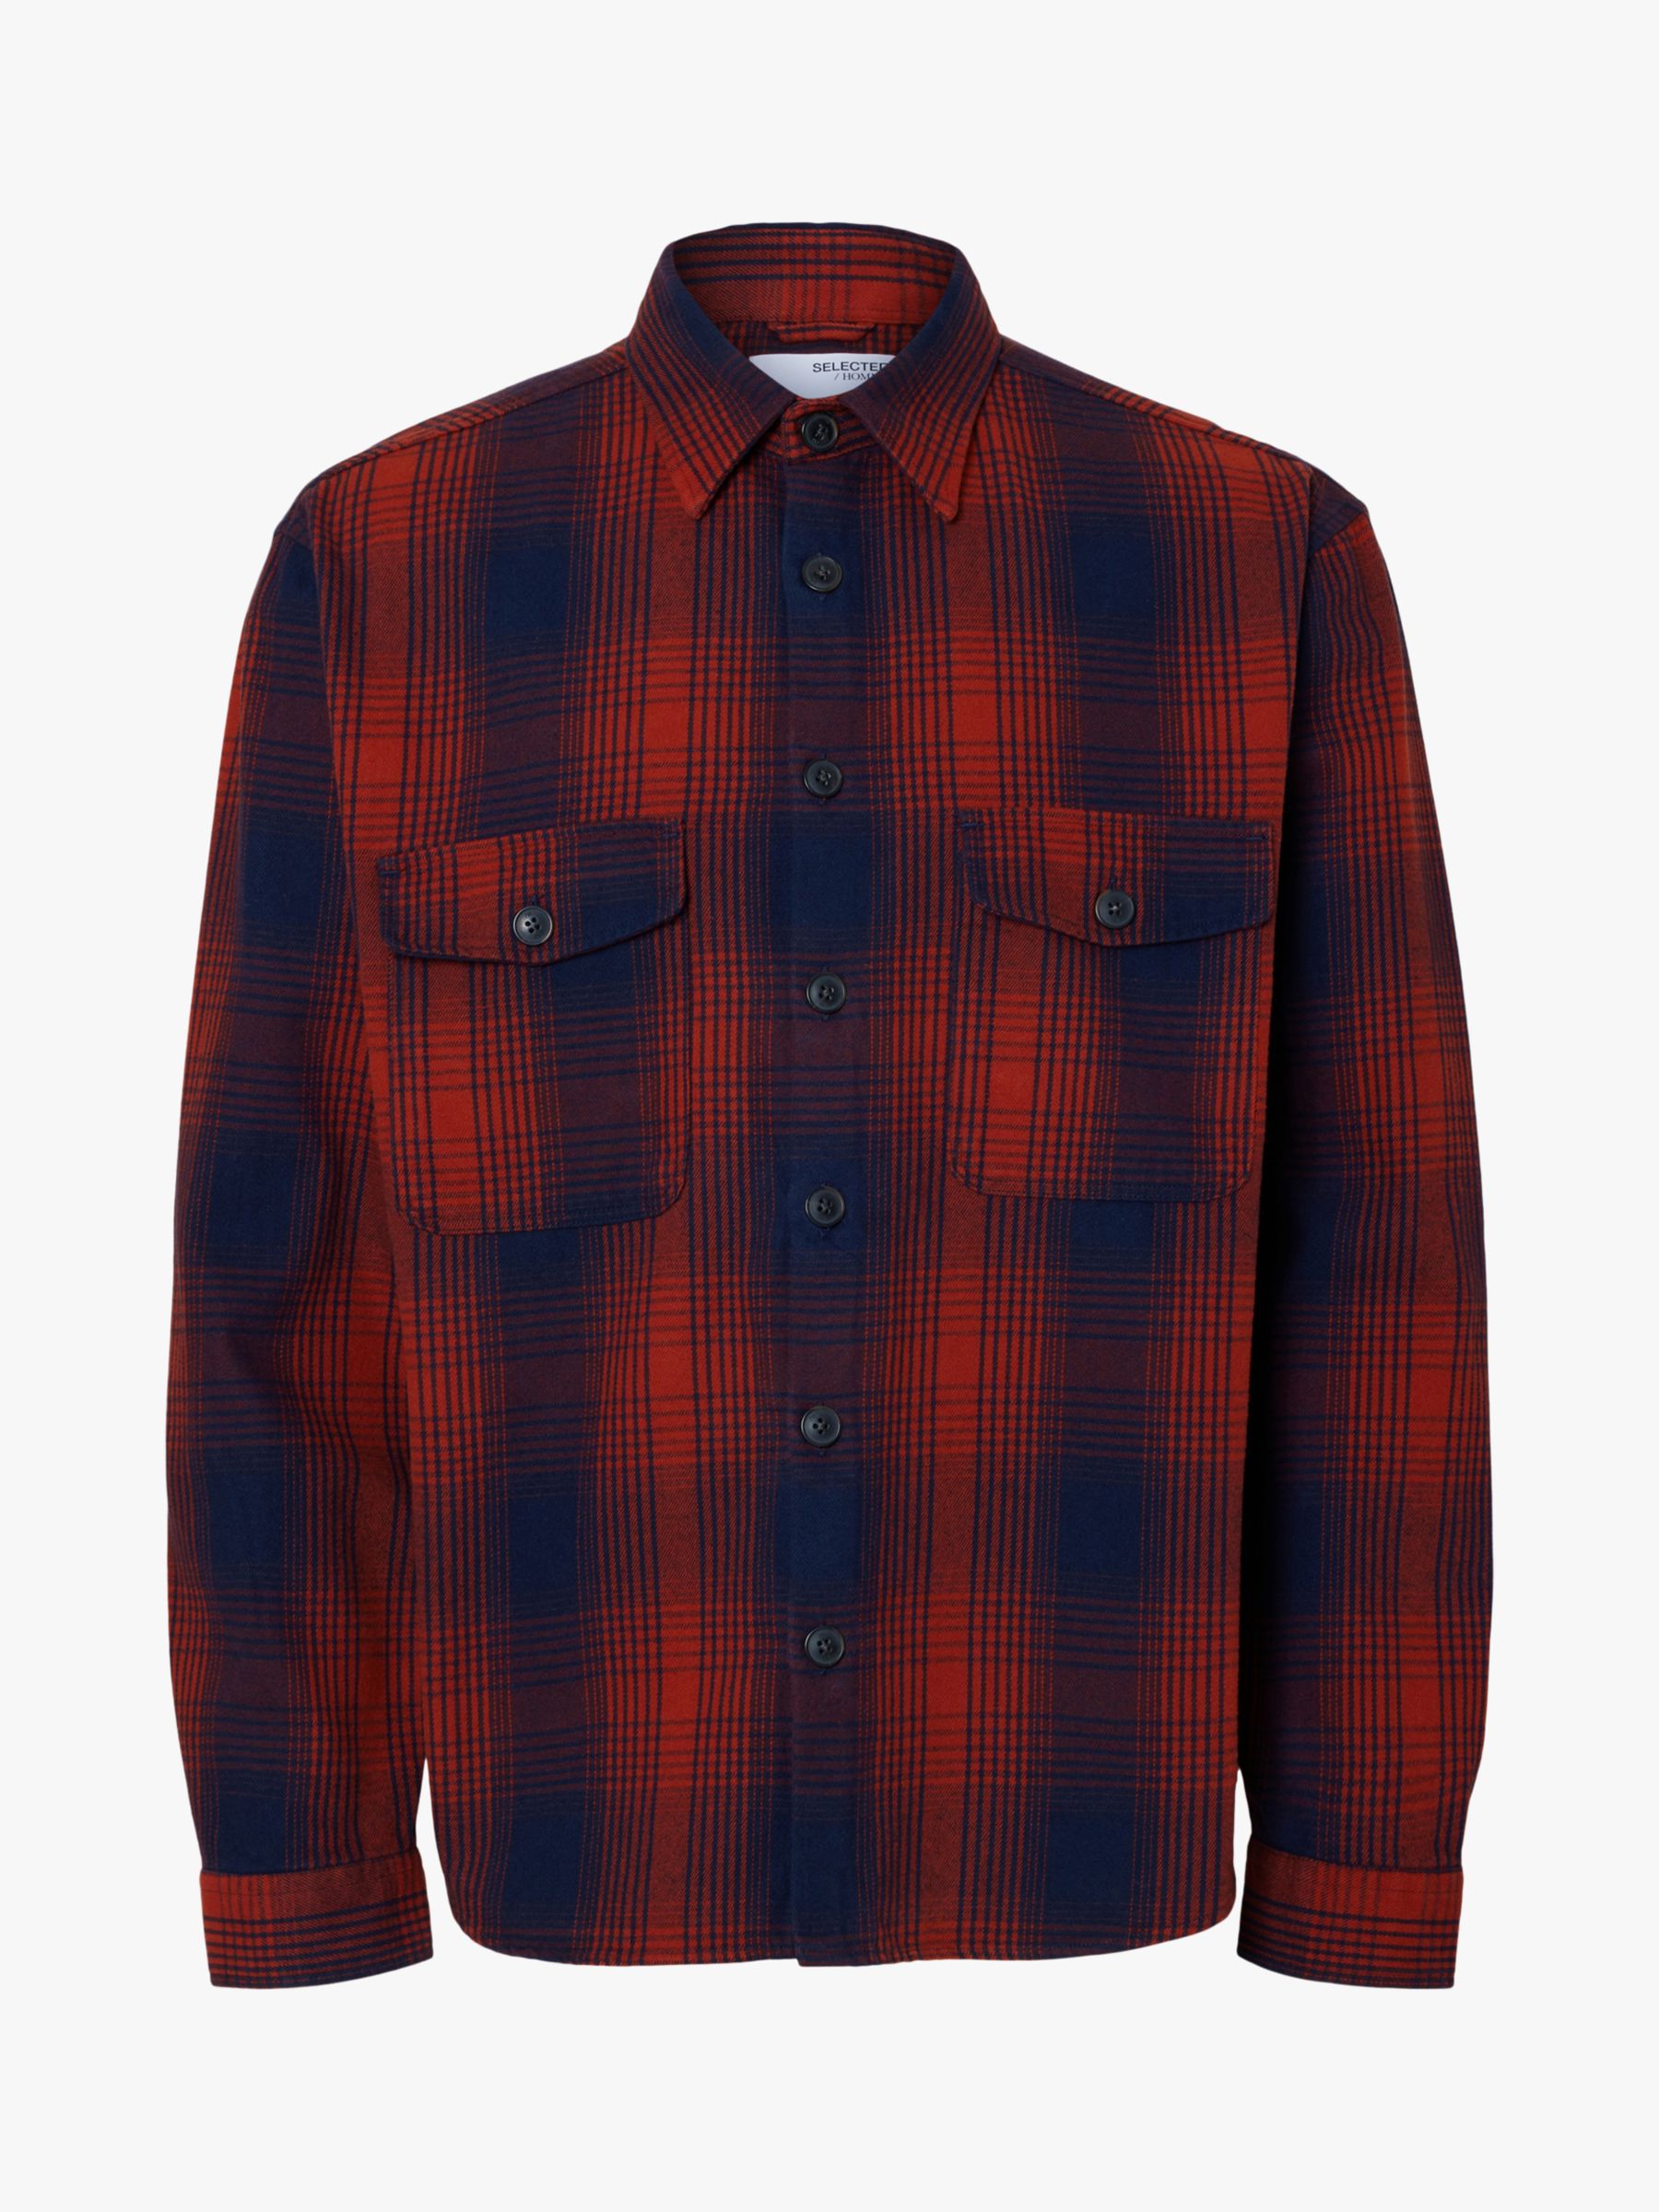 SELECTED HOMME Mason Recycled Cotton Flannel Shirt at John Lewis & Partners